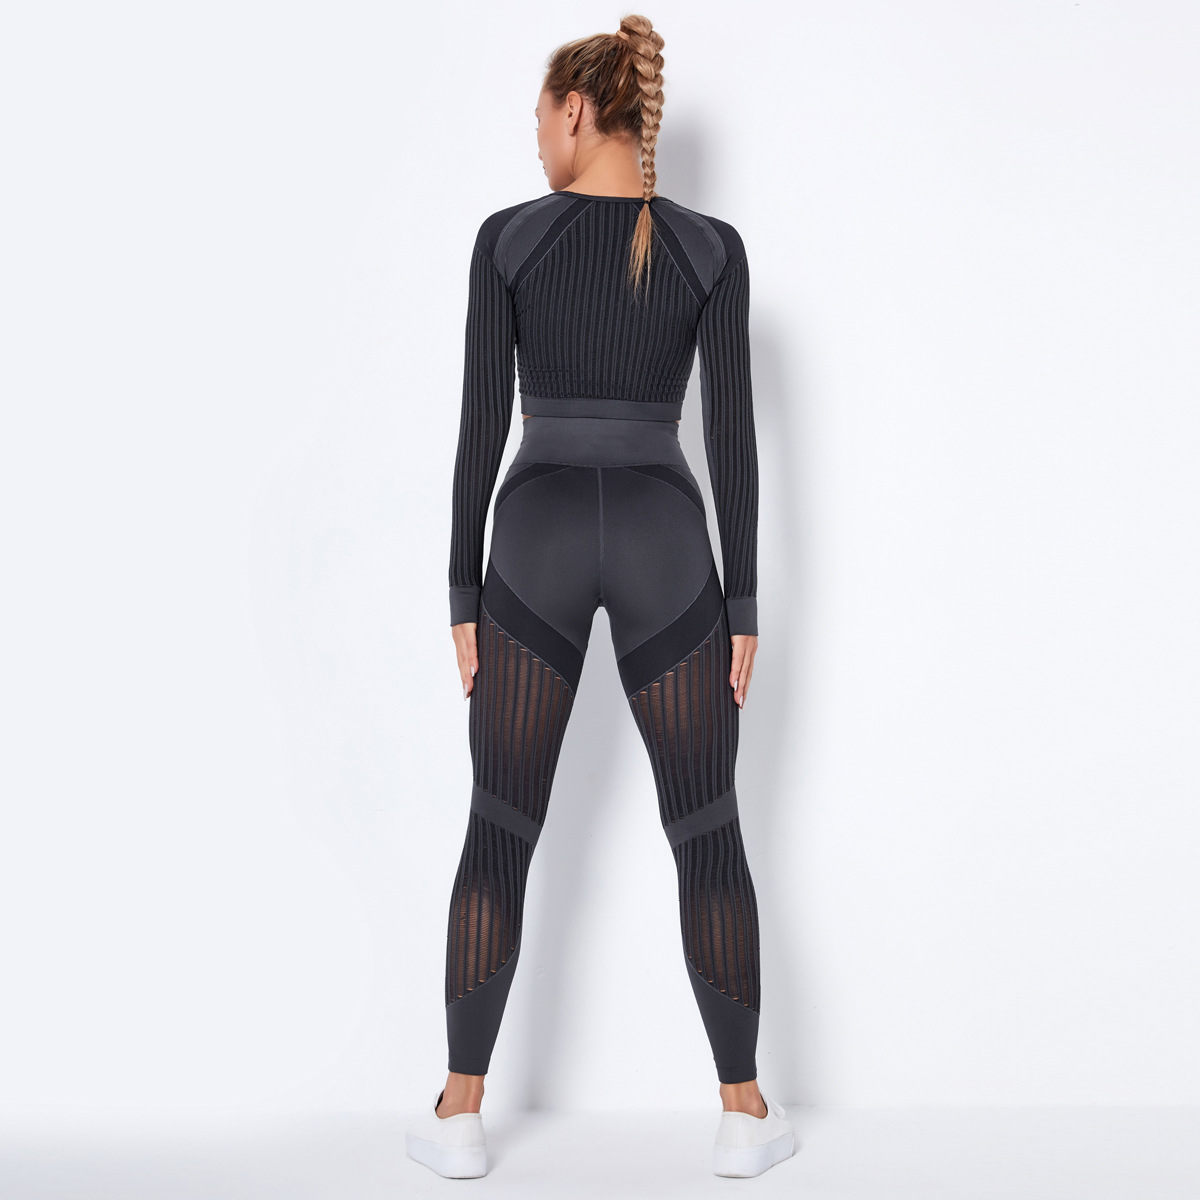 Seamless Knitted Quick-Drying Sports Yoga Suits NSLX8983